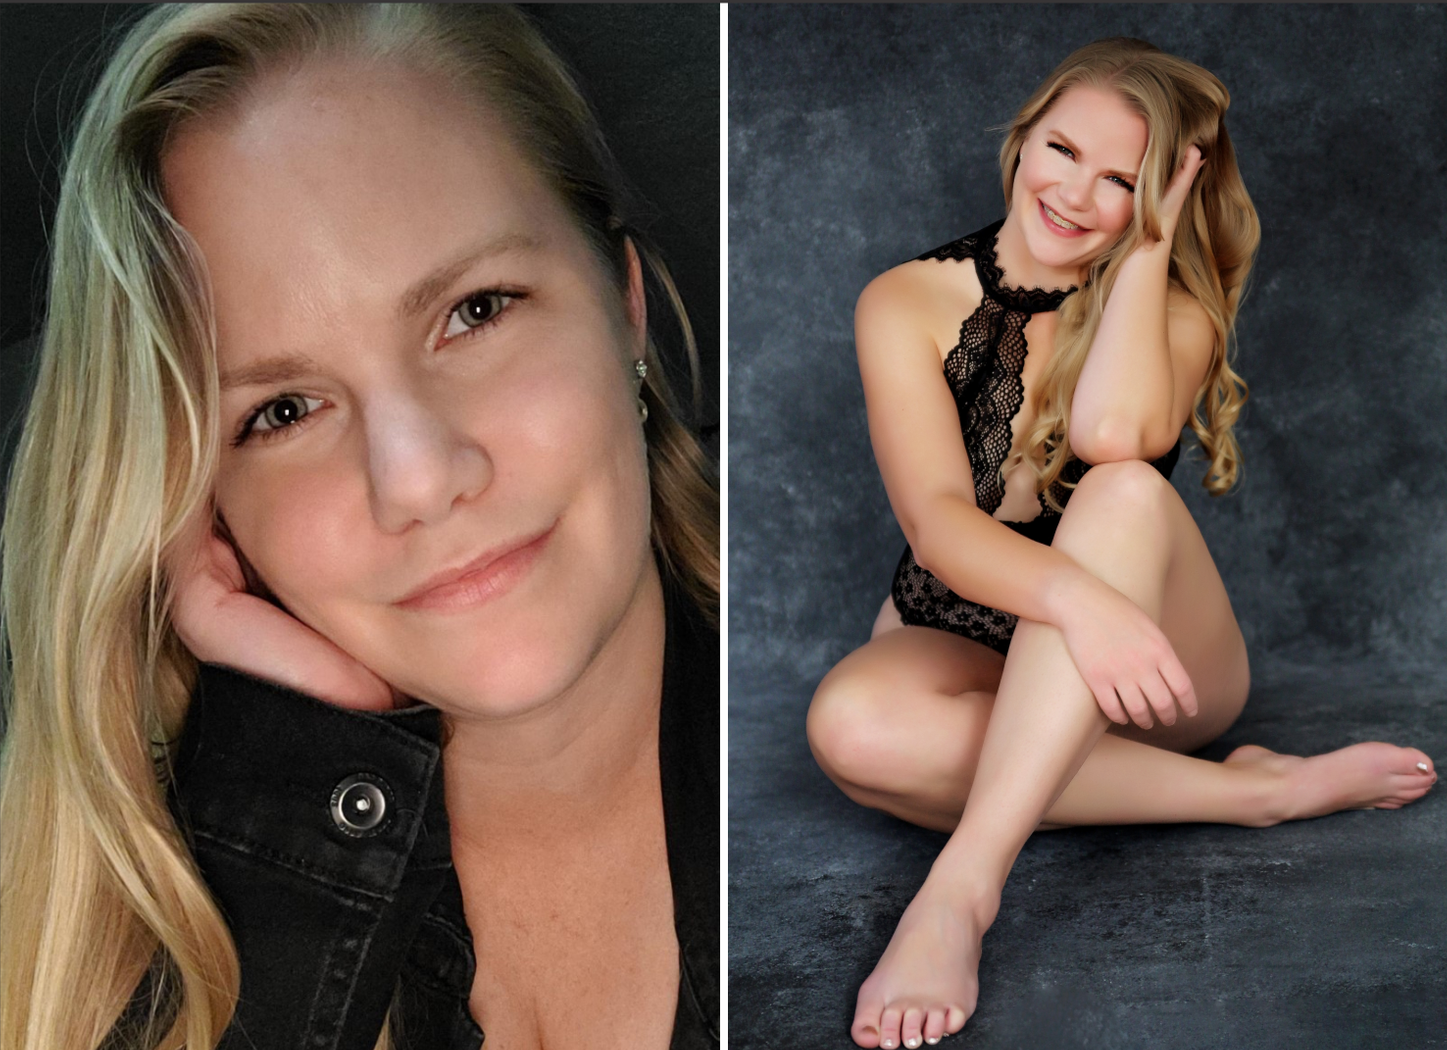 Before and after side-by-side portraits of the same woman, one close-up showing her face as she leans her head on her hand, and the other sitting with crossed legs, smiling broadly in a black lace bodysuit at main street boudoir